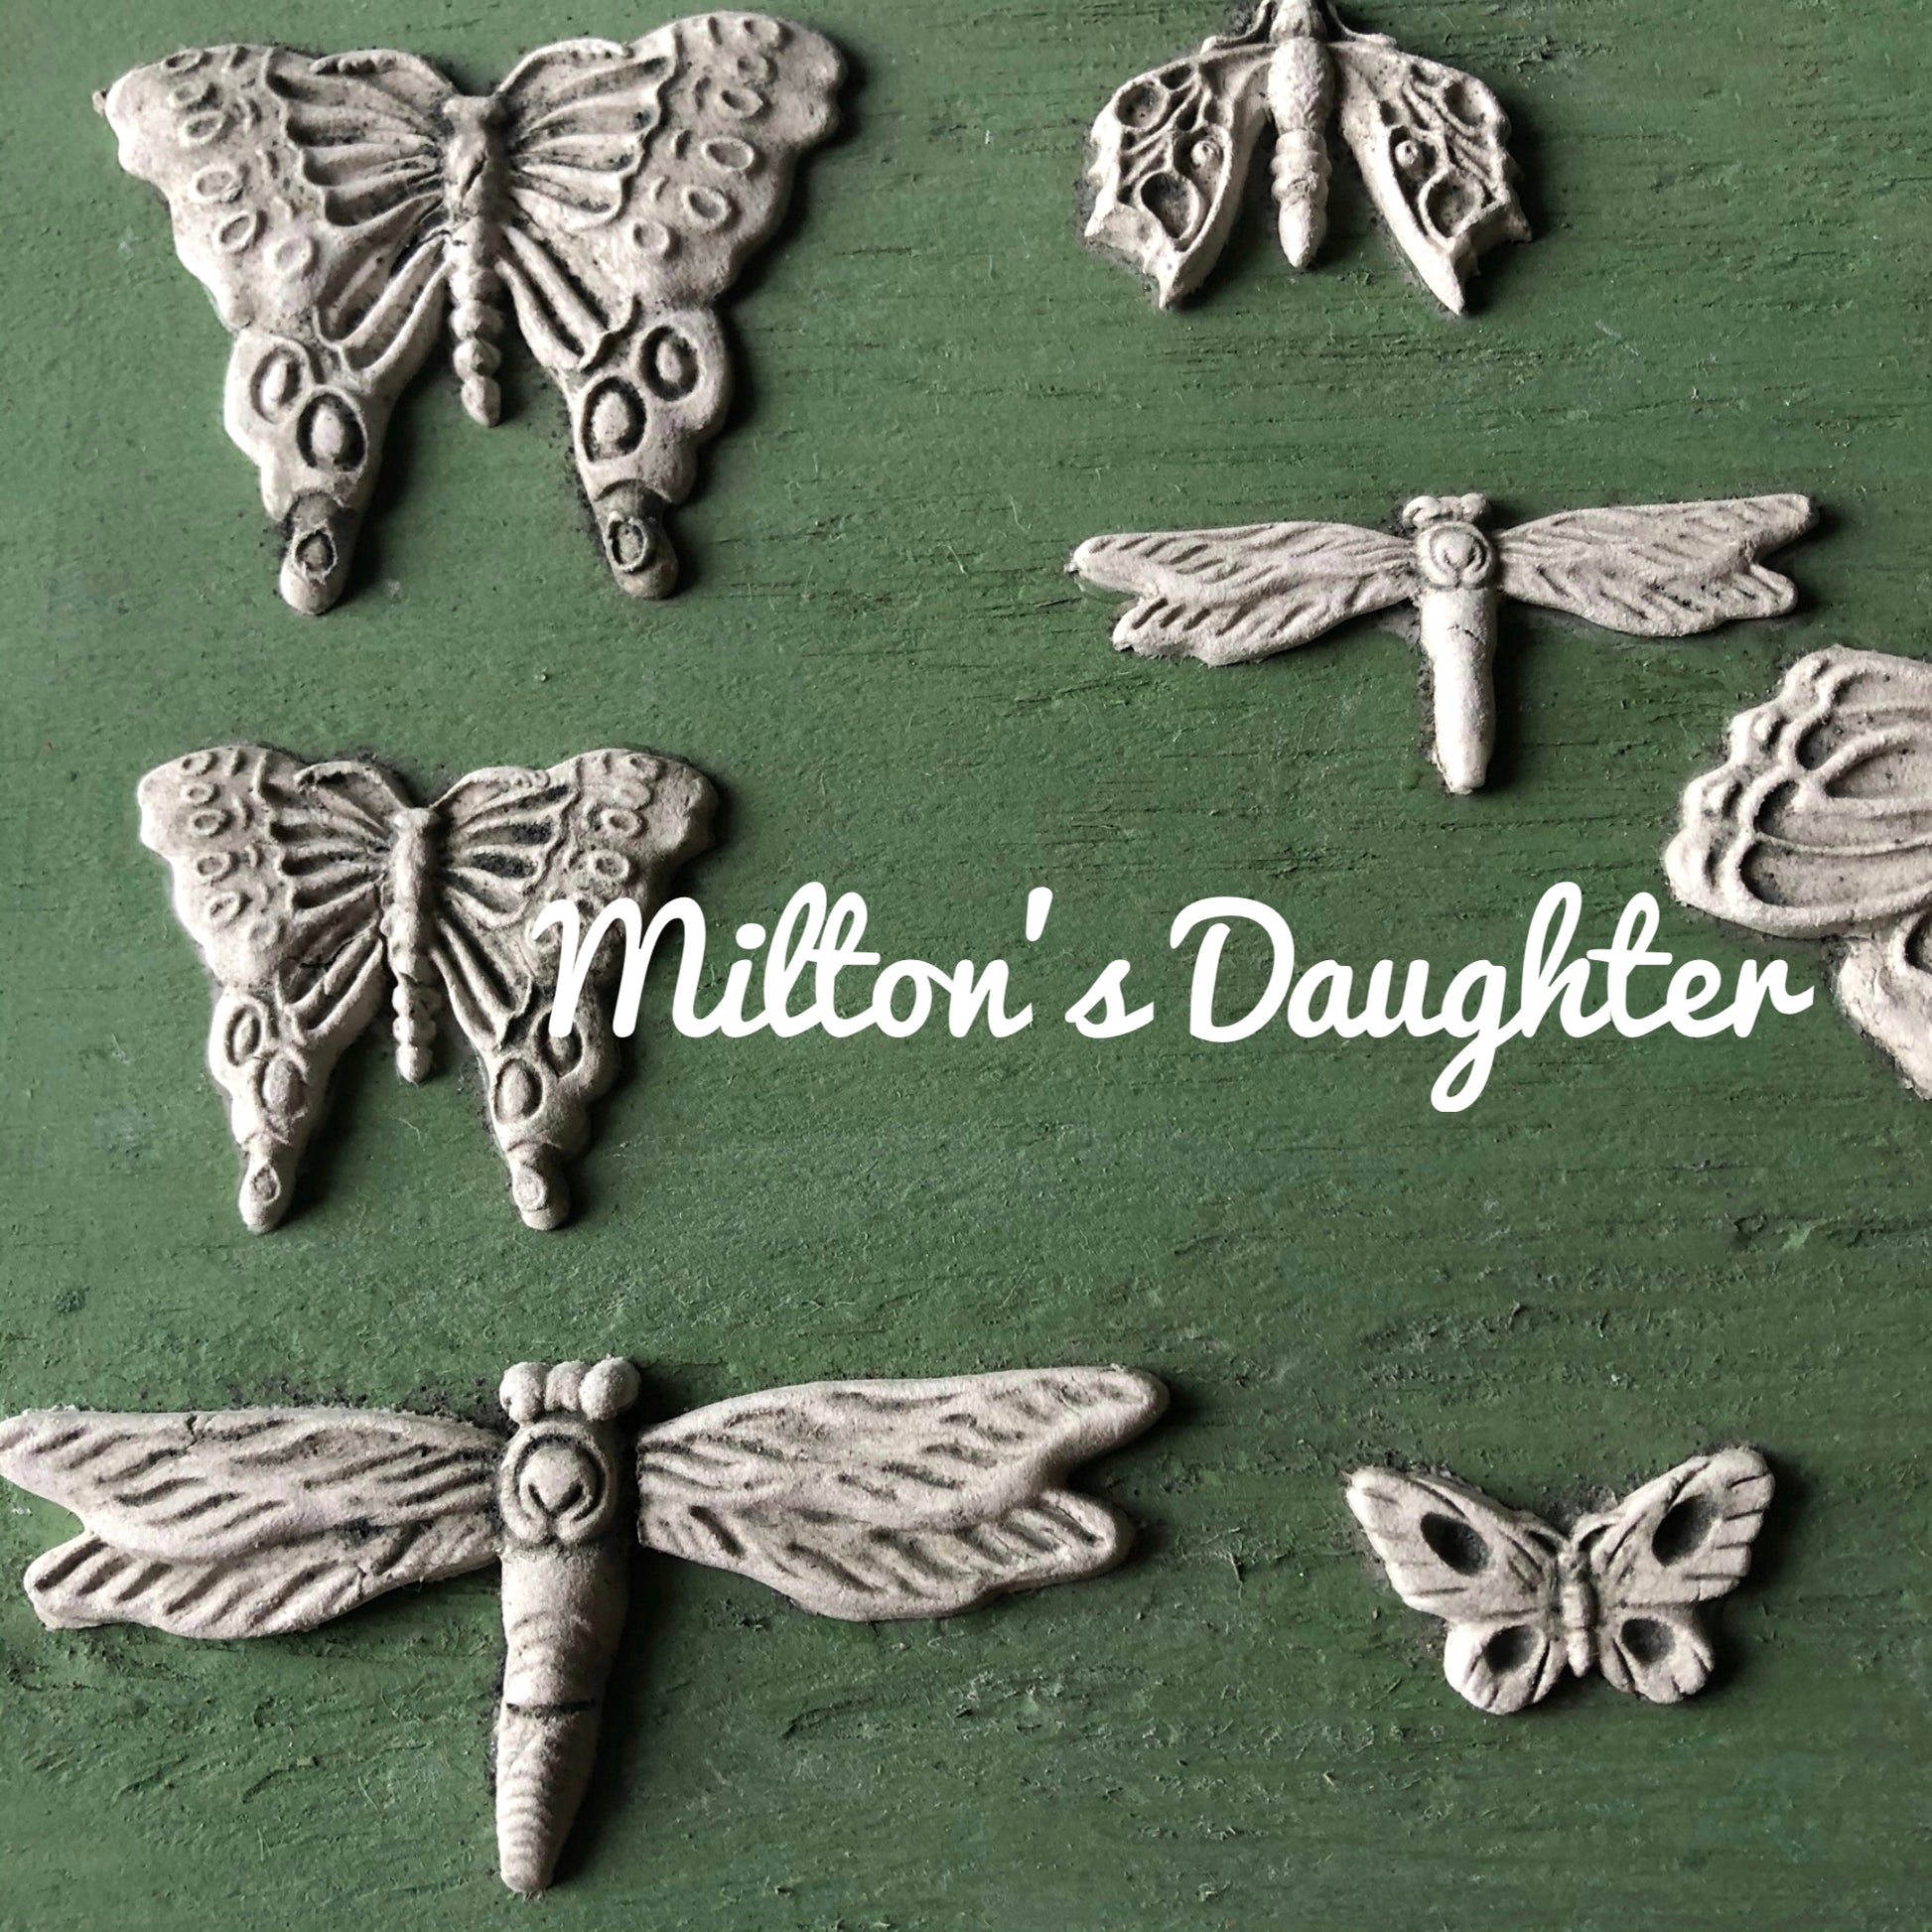 Monarch Mold by Iron Orchid Designs. Sample butterfly castings assorted at Milton's Daughter